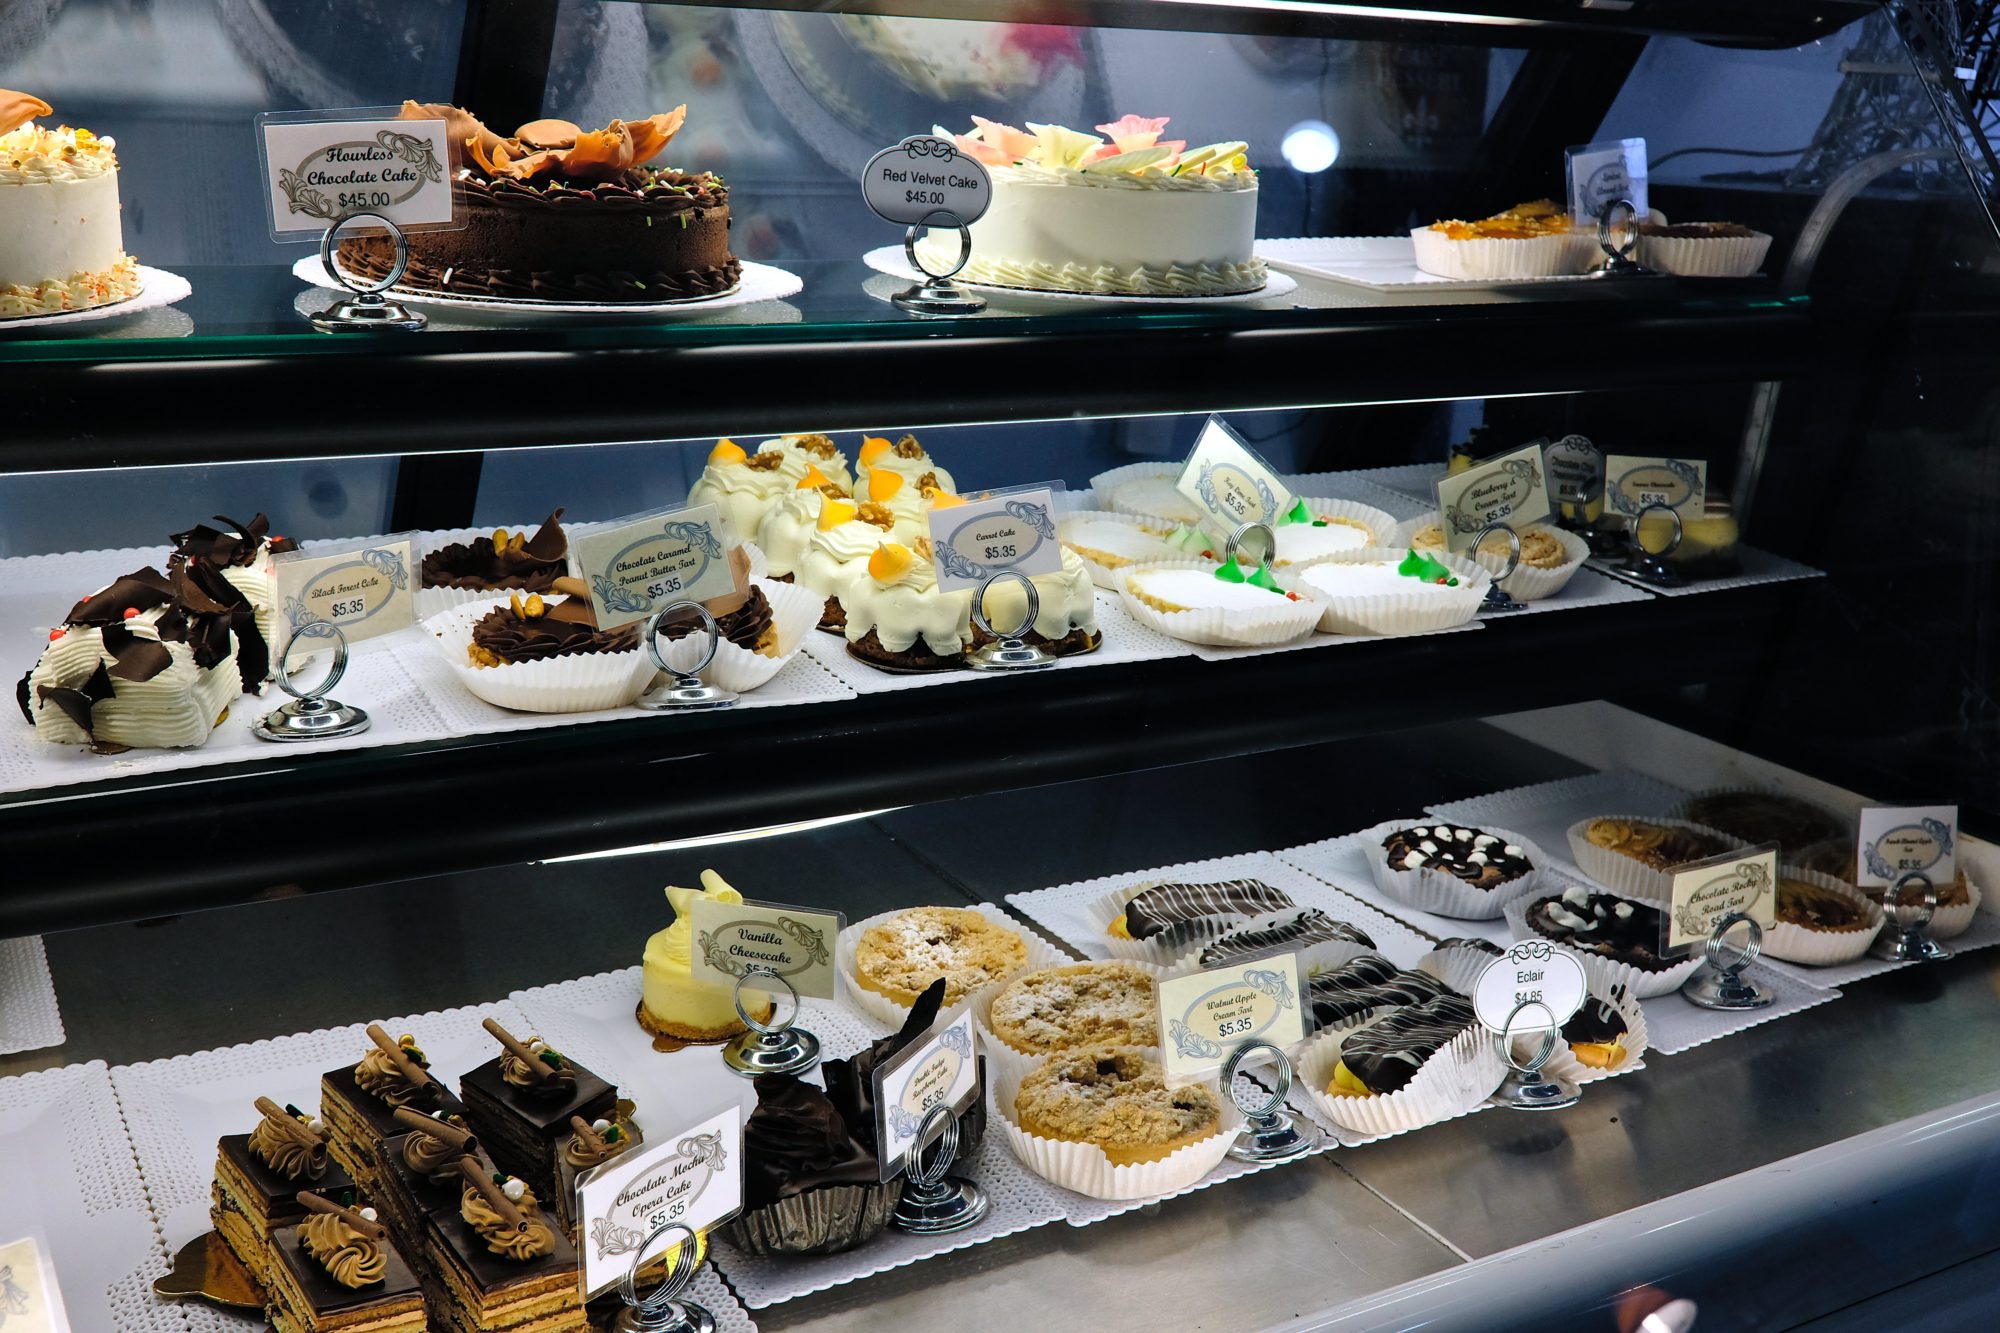 Display of cakes and pastries at Chocolatier Barrucand